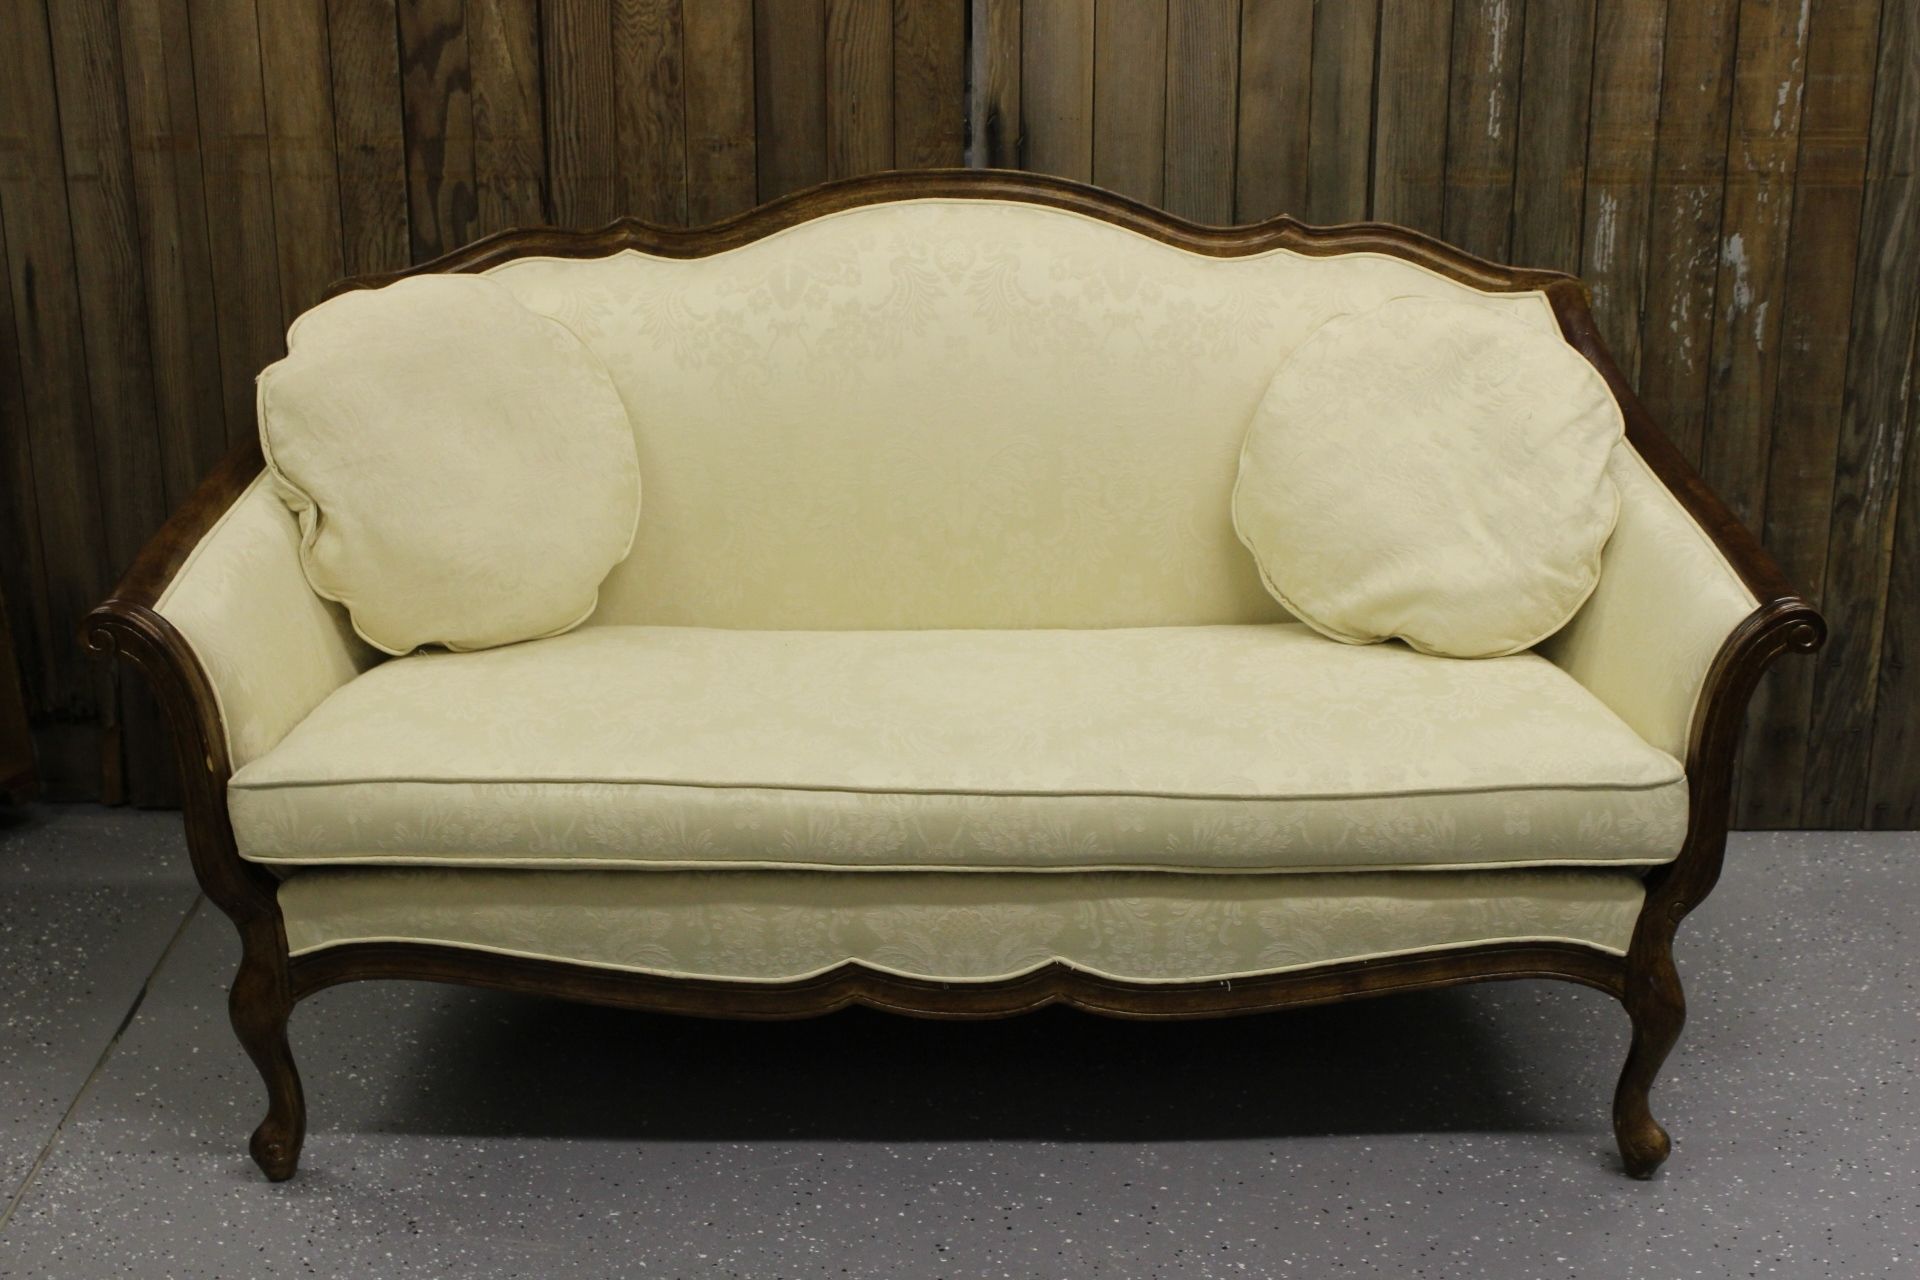 Furniture. Sofa Styles Antique: Antique Loveseat Old Fashioned Inside Well Known Old Fashioned Sofas (Photo 13 of 20)